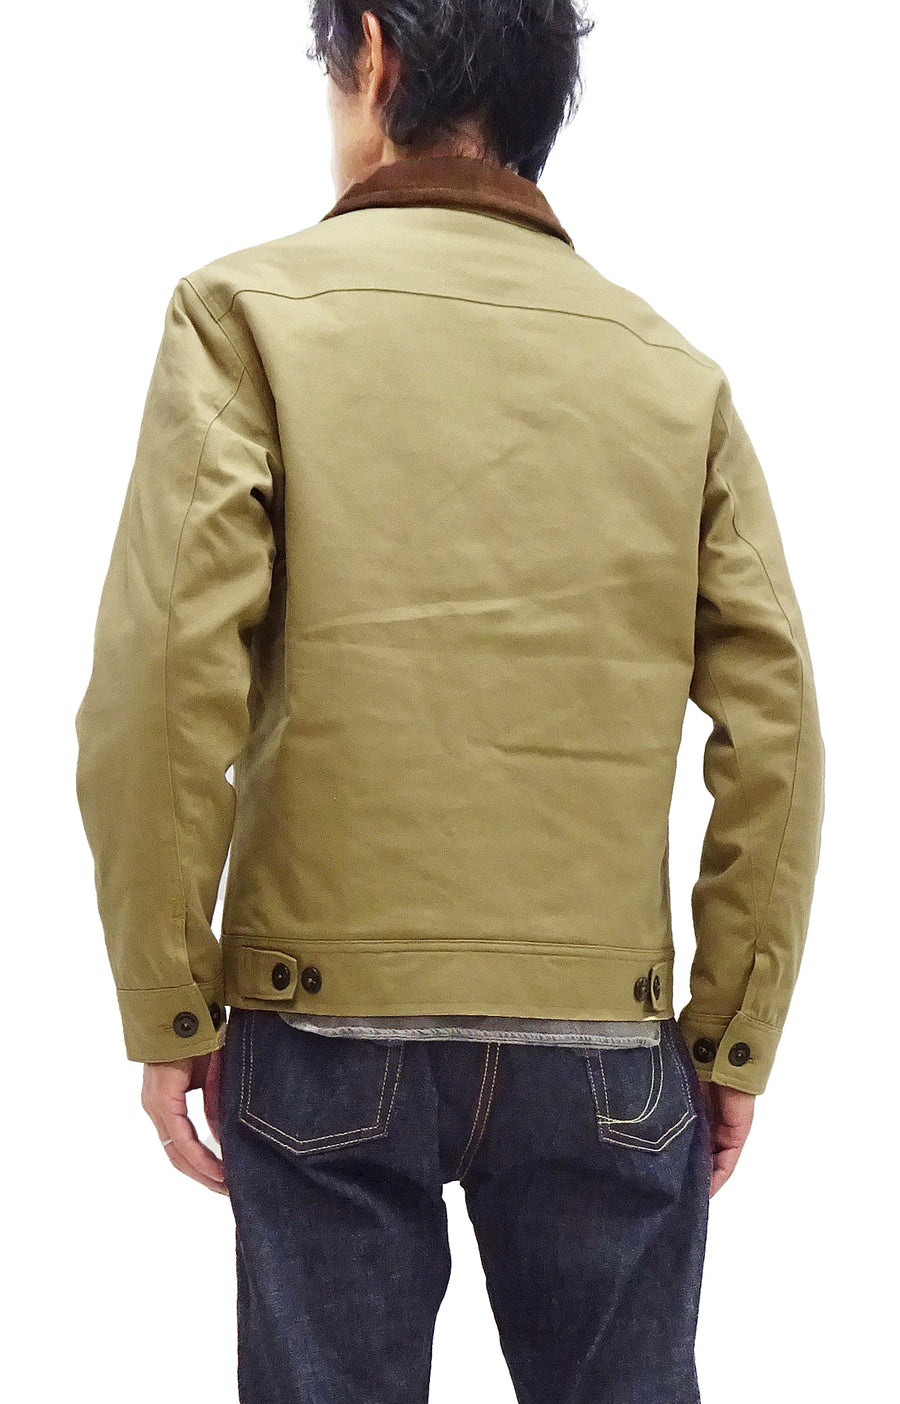 Sugar Cane Jacket Men's Front Zip Canvas Work Jacket With Padded Quilted Lining And Corduroy Collar SC15401 133 Beige